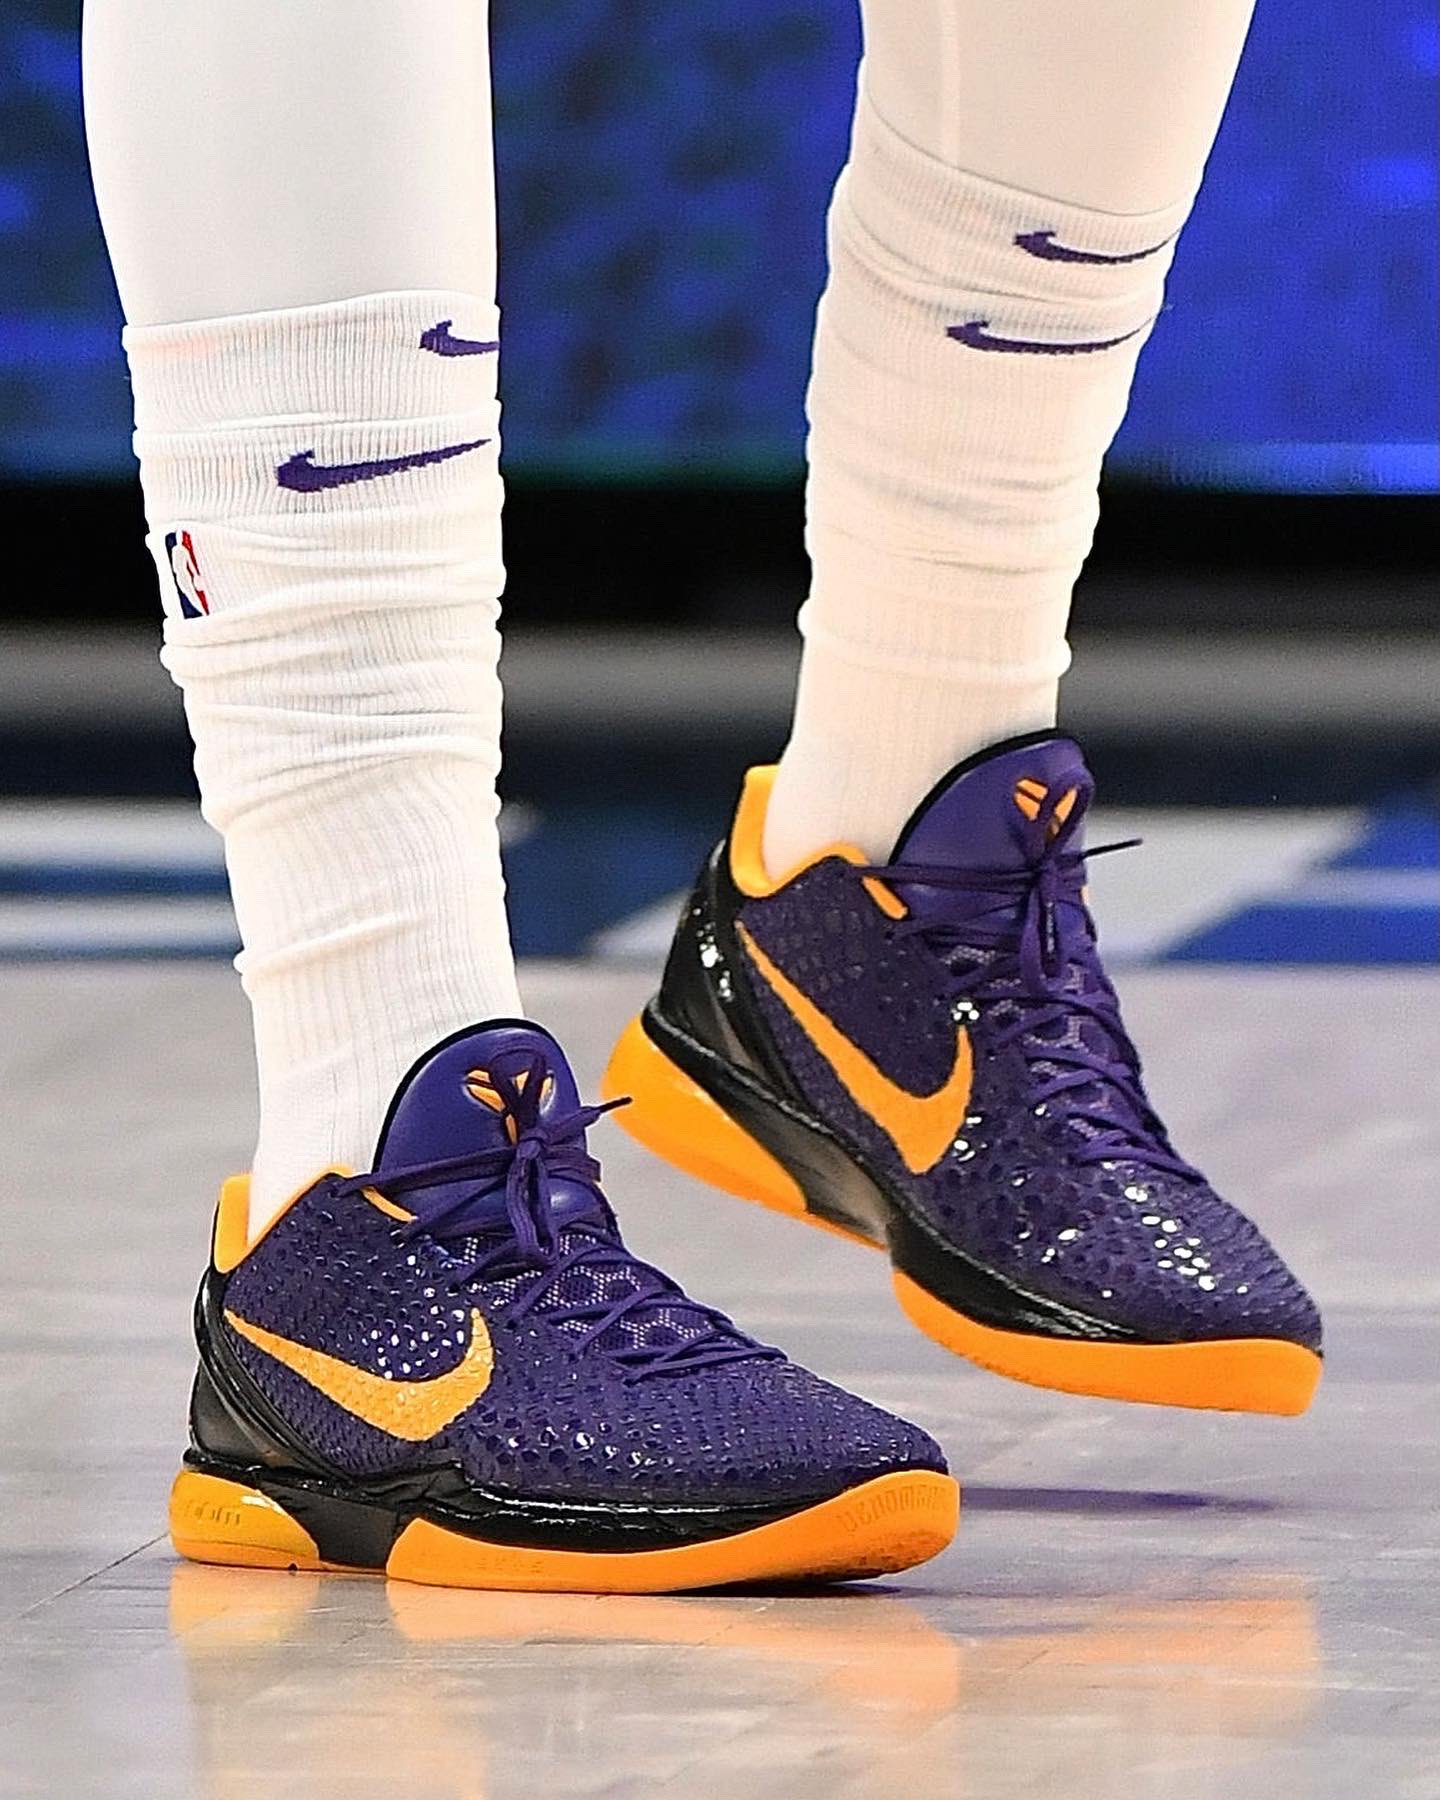 Anthony Davis wearing an Icy Kobe 6 on the court today. : r/Sneakers